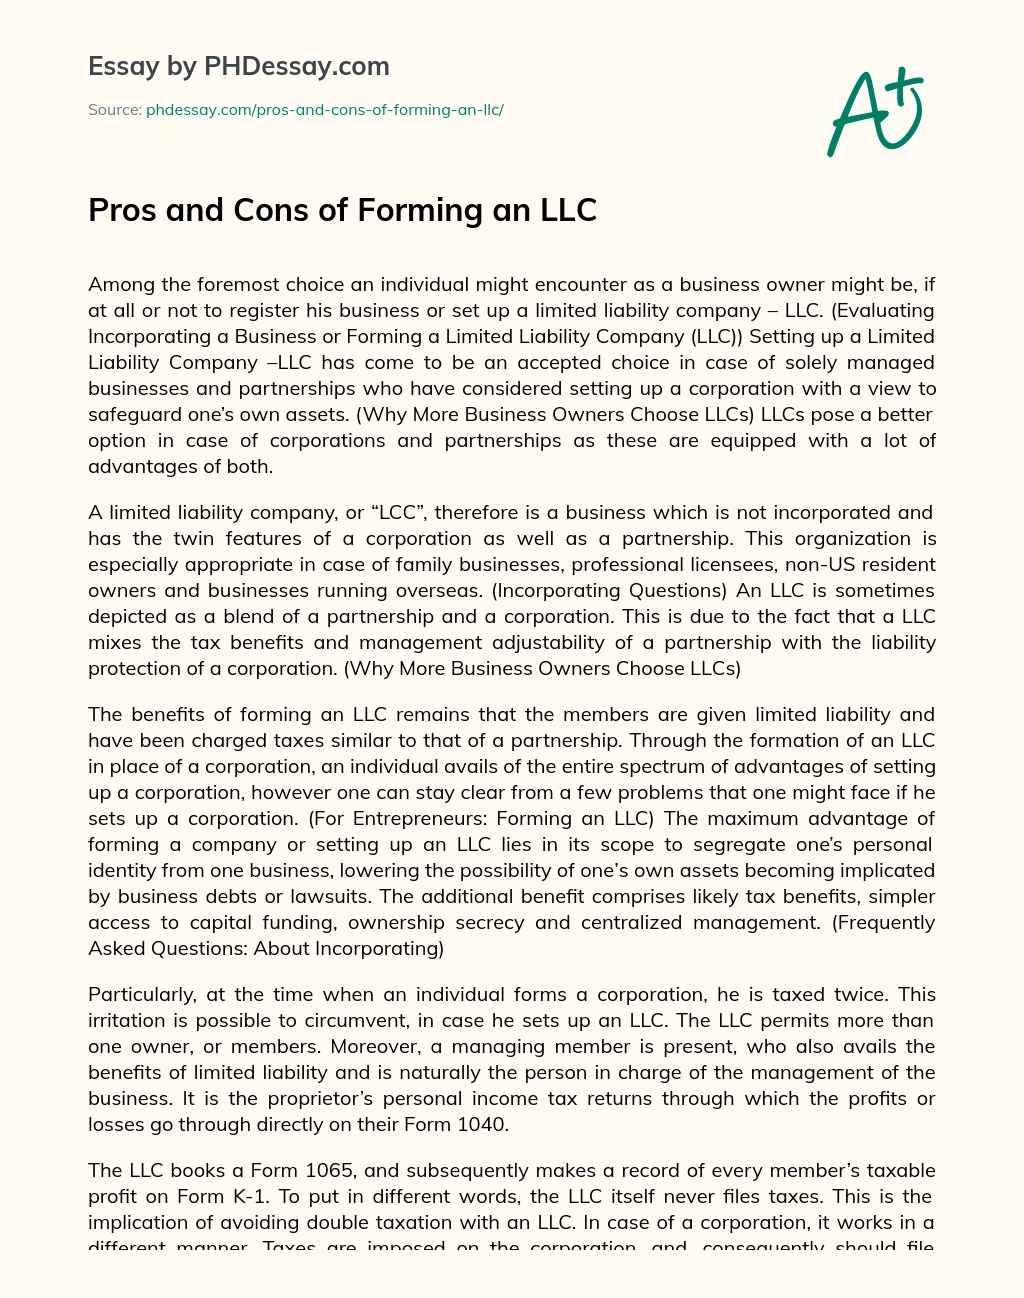 Pros and Cons of Forming an LLC essay